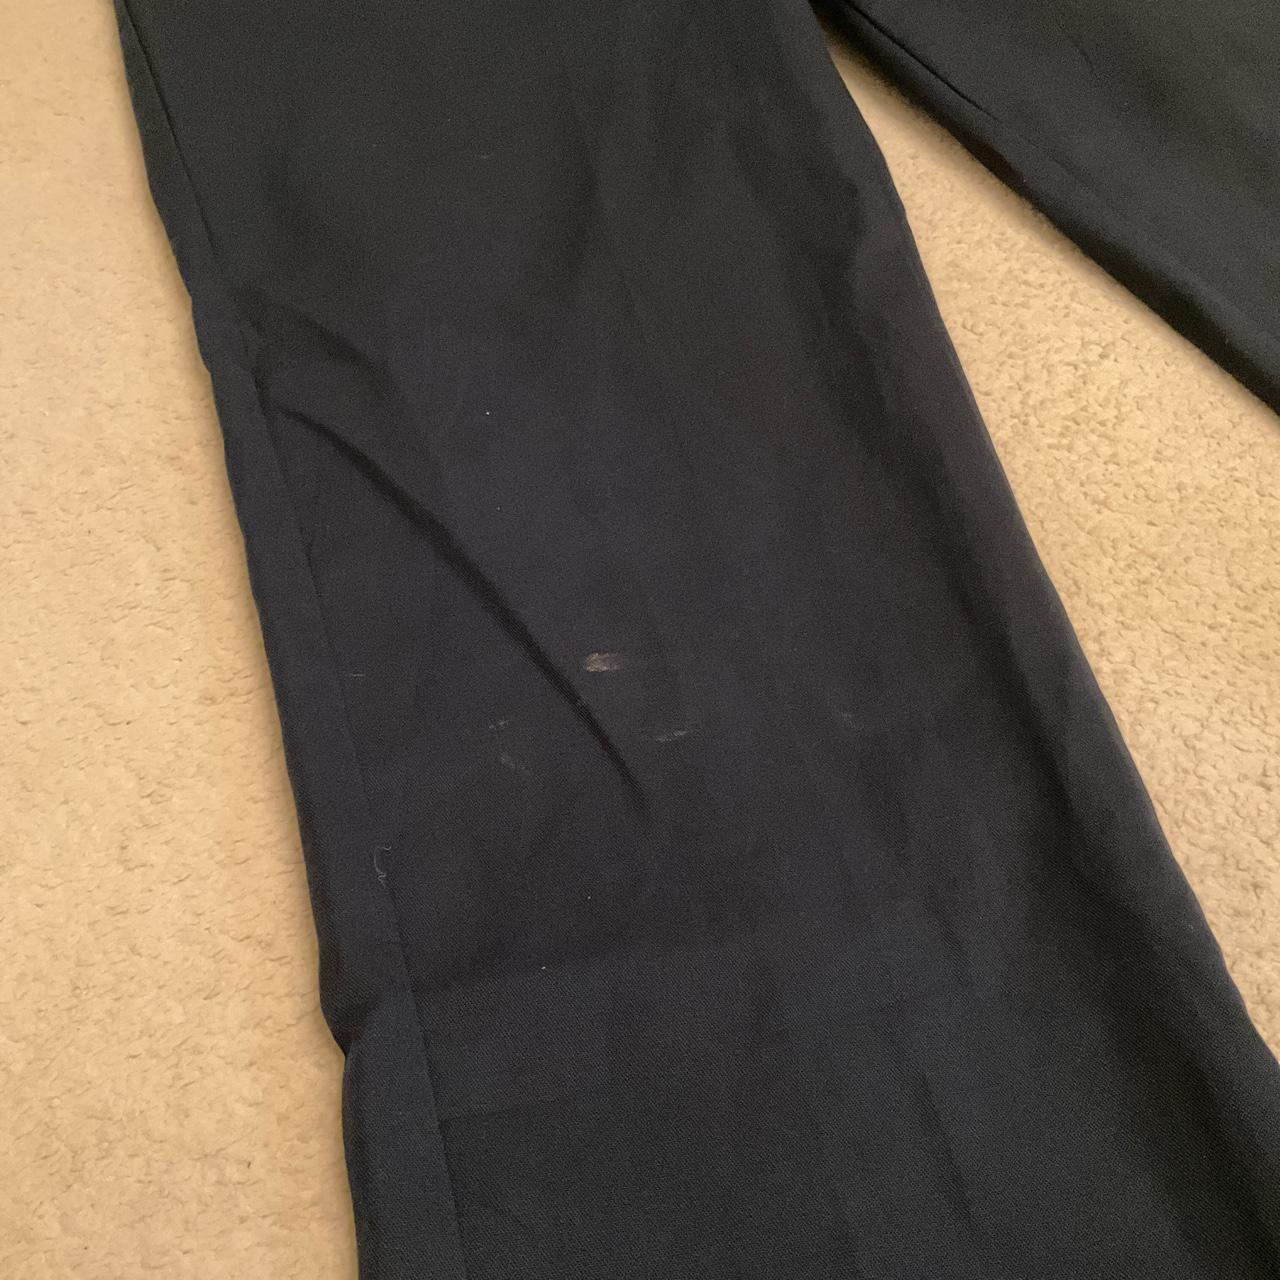 Product Image 4 - Dickies vintage workwear trousers.

Great condition,